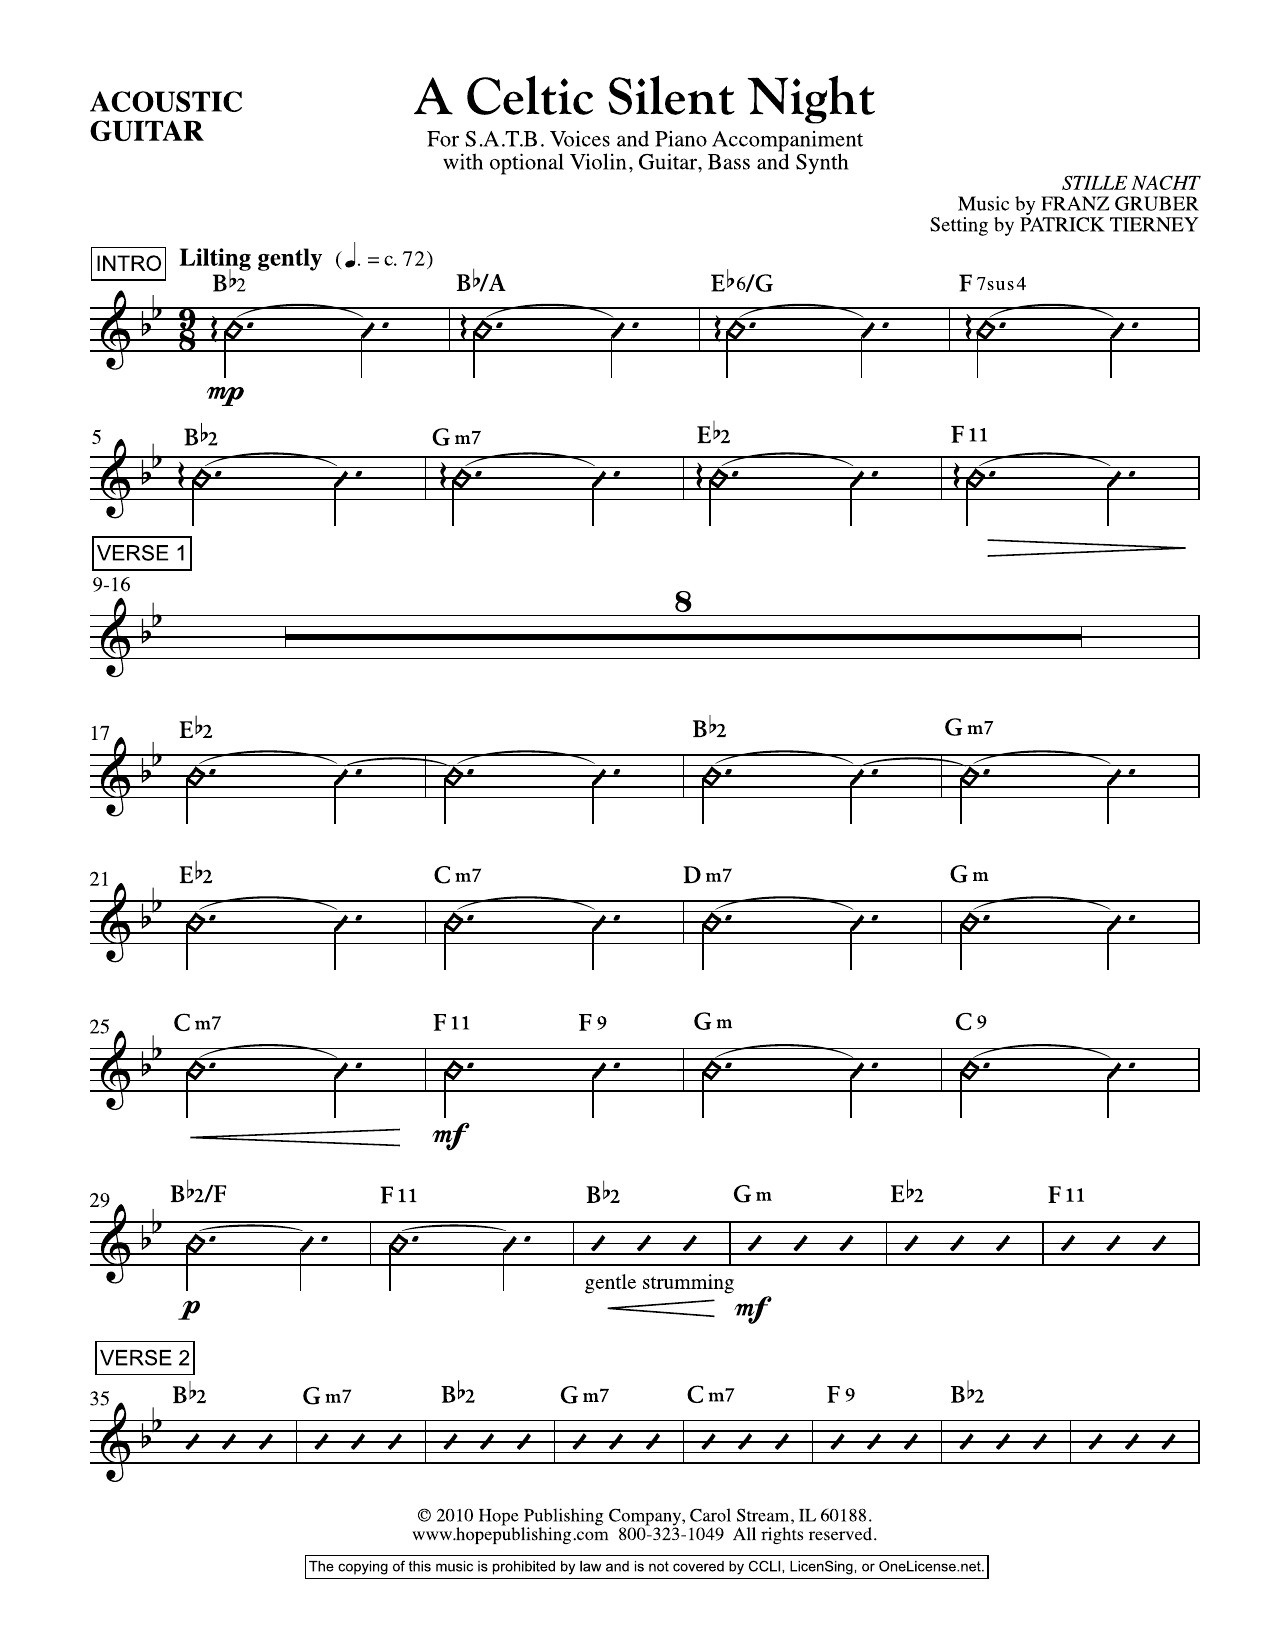 Download Franz Gruber A Celtic Silent Night - Acoustic Guitar Sheet Music